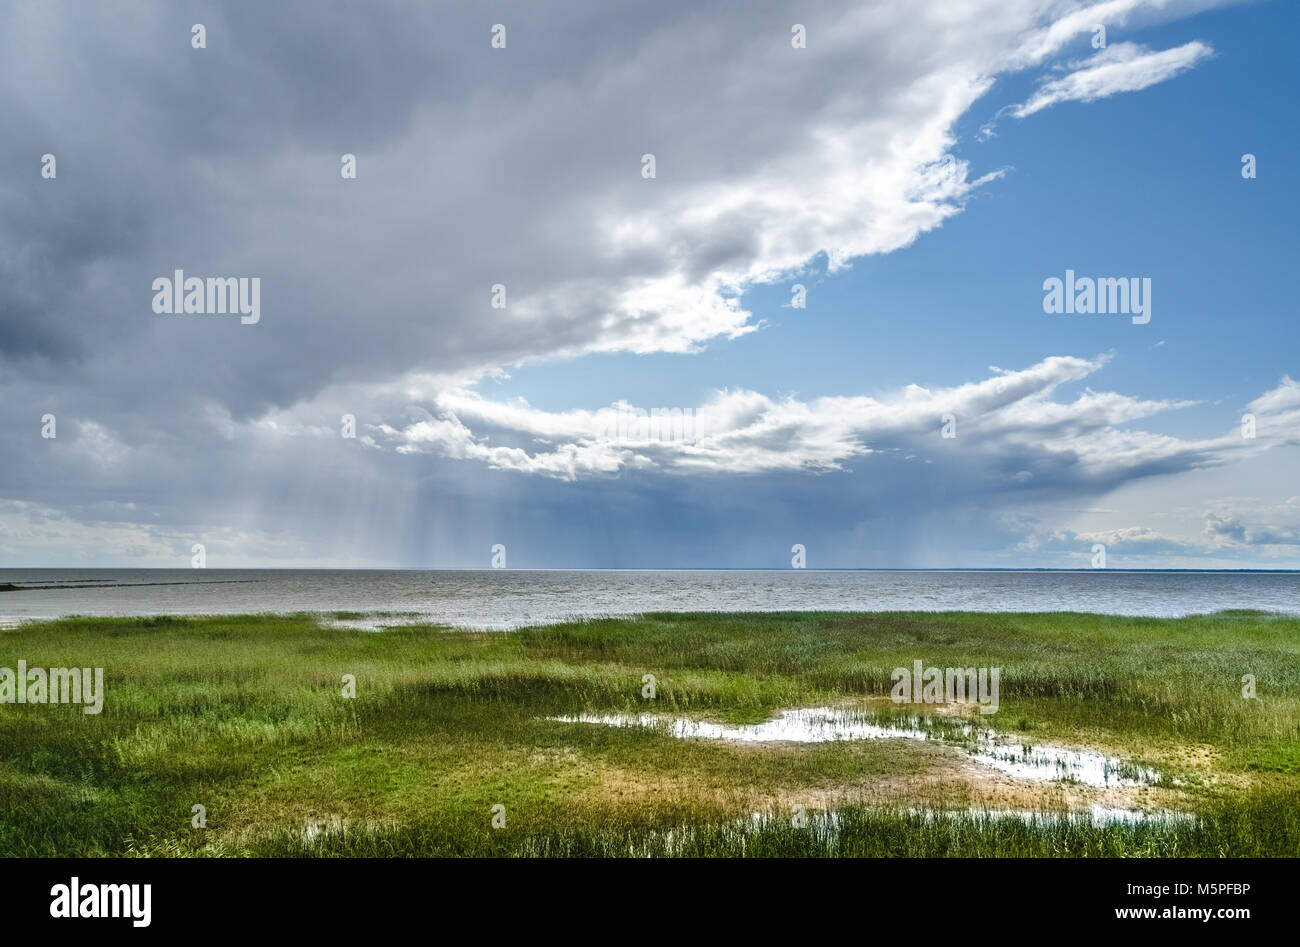 On the shores of Lake Võrtsjärv against cloudy and sunny skies in summer. It's second largest lake in Estonia (behind Lake Peipus). Stock Photo